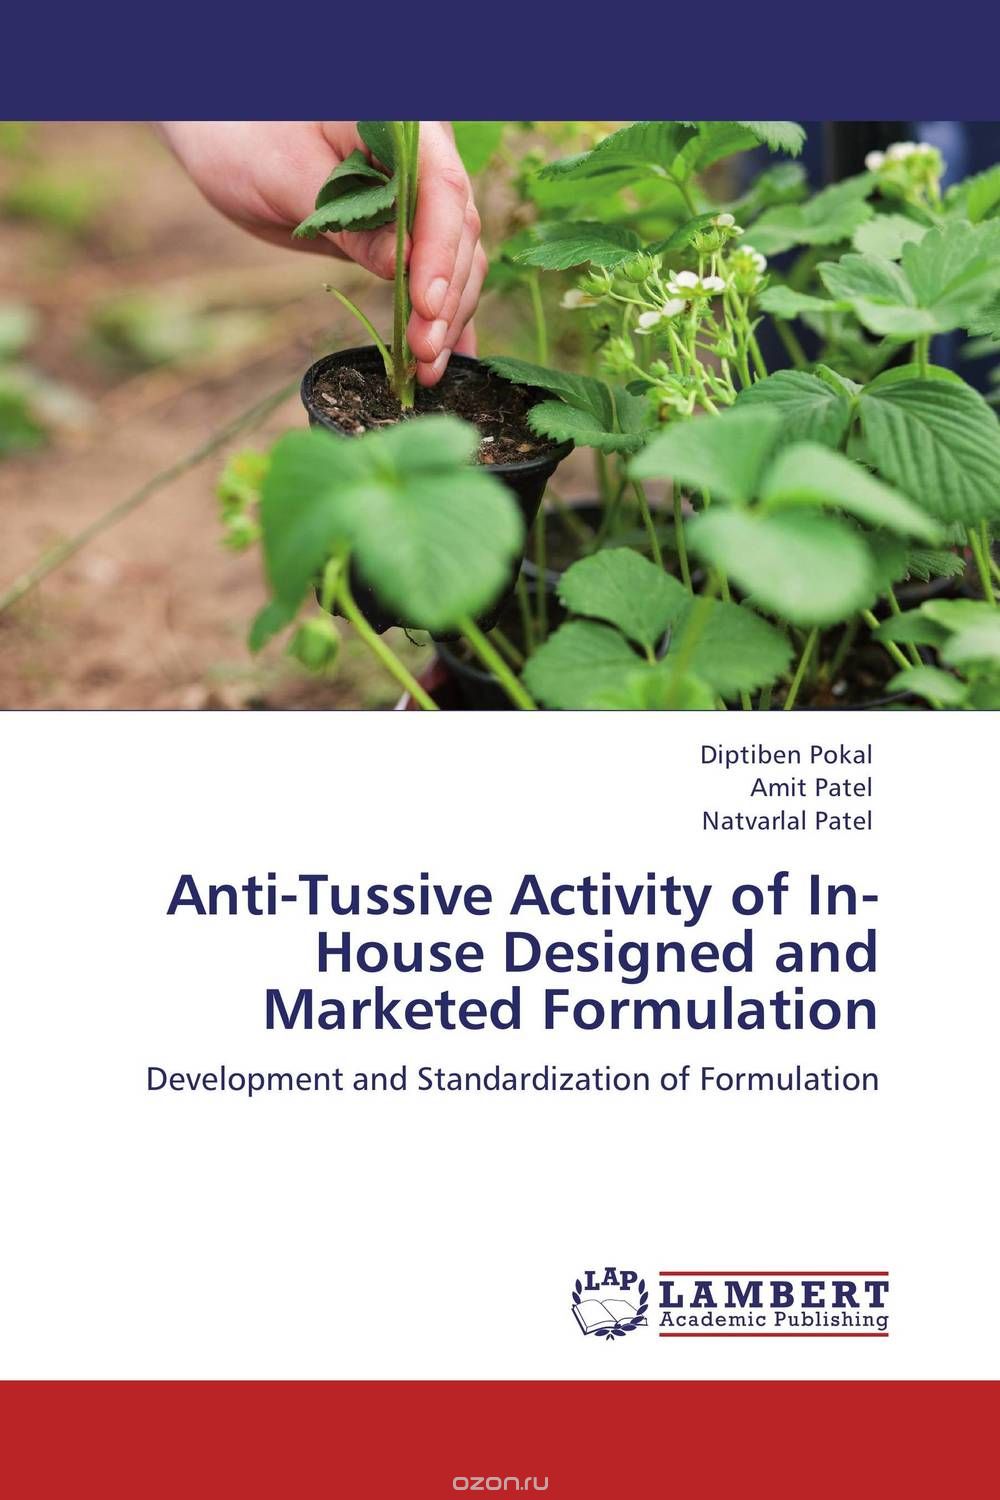 Скачать книгу "Anti-Tussive Activity of In-House Designed and Marketed Formulation"